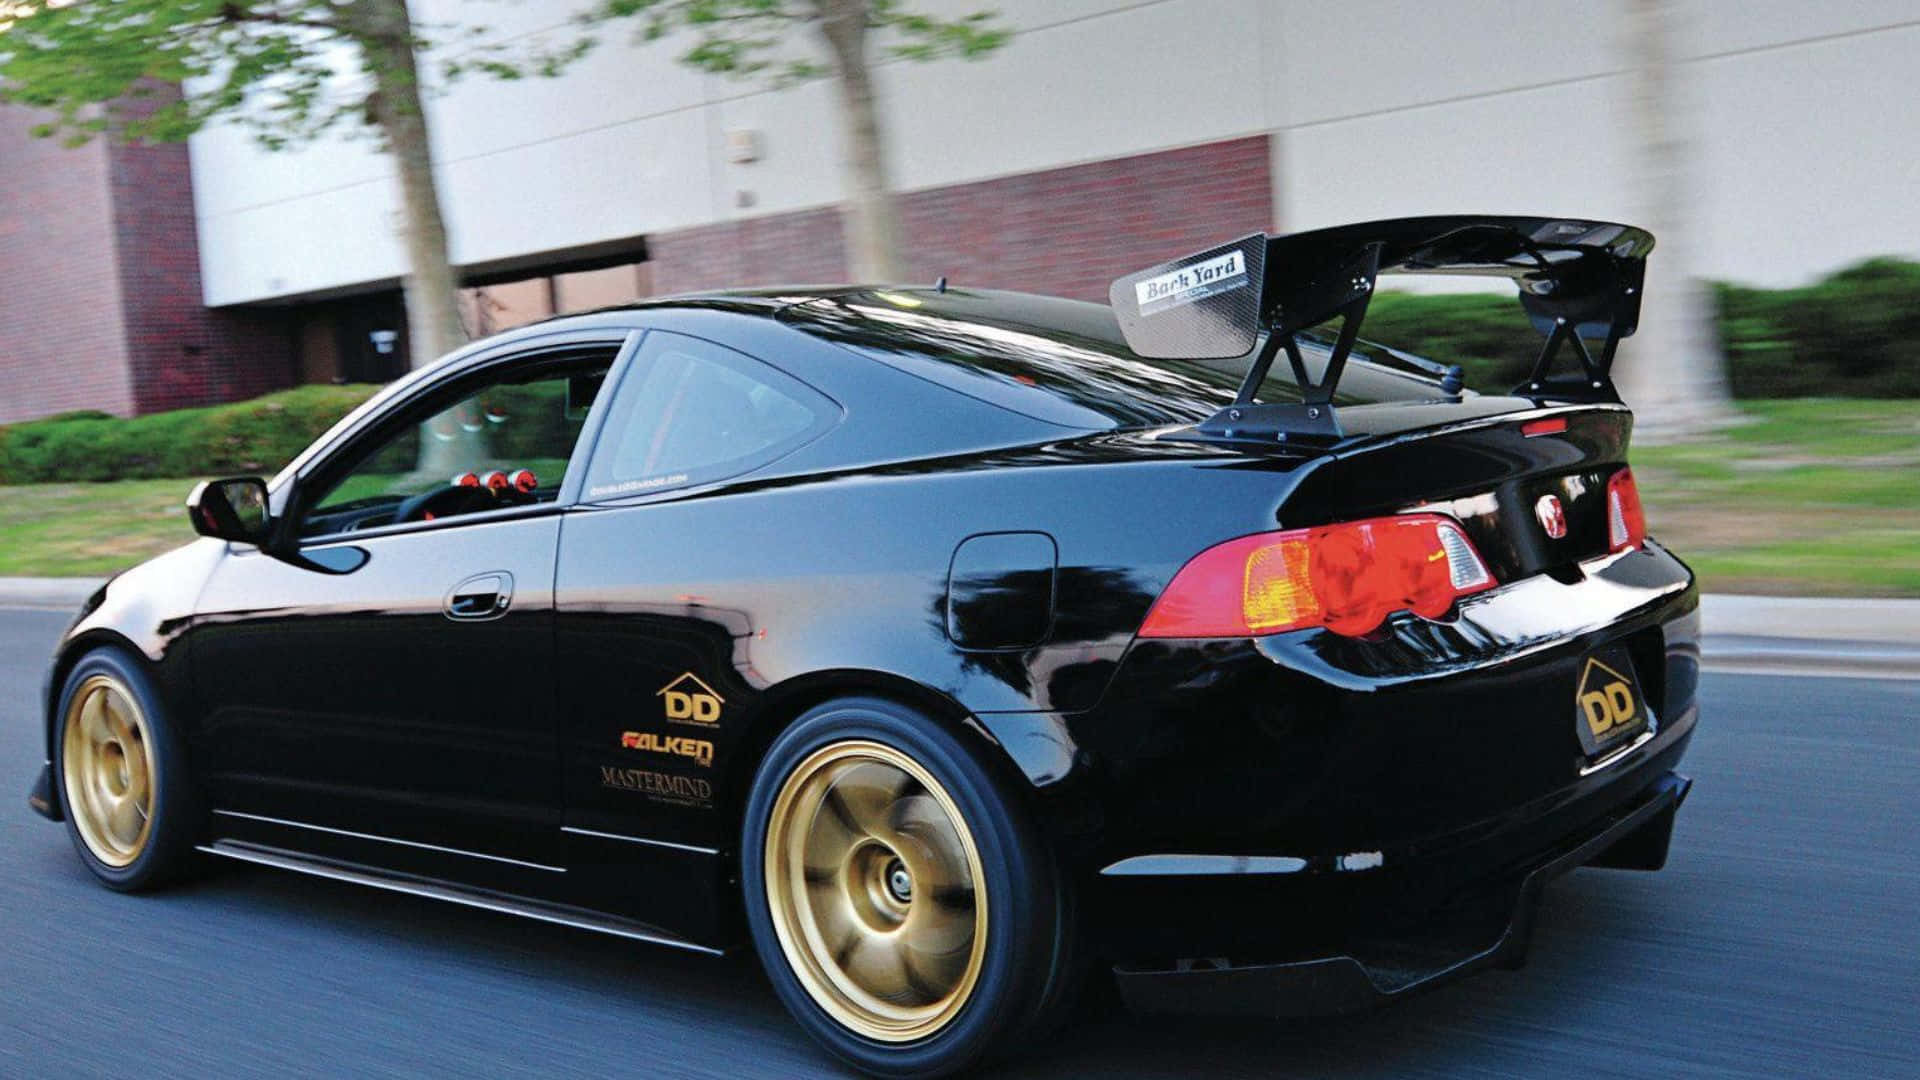 black acura rsx with gold rims